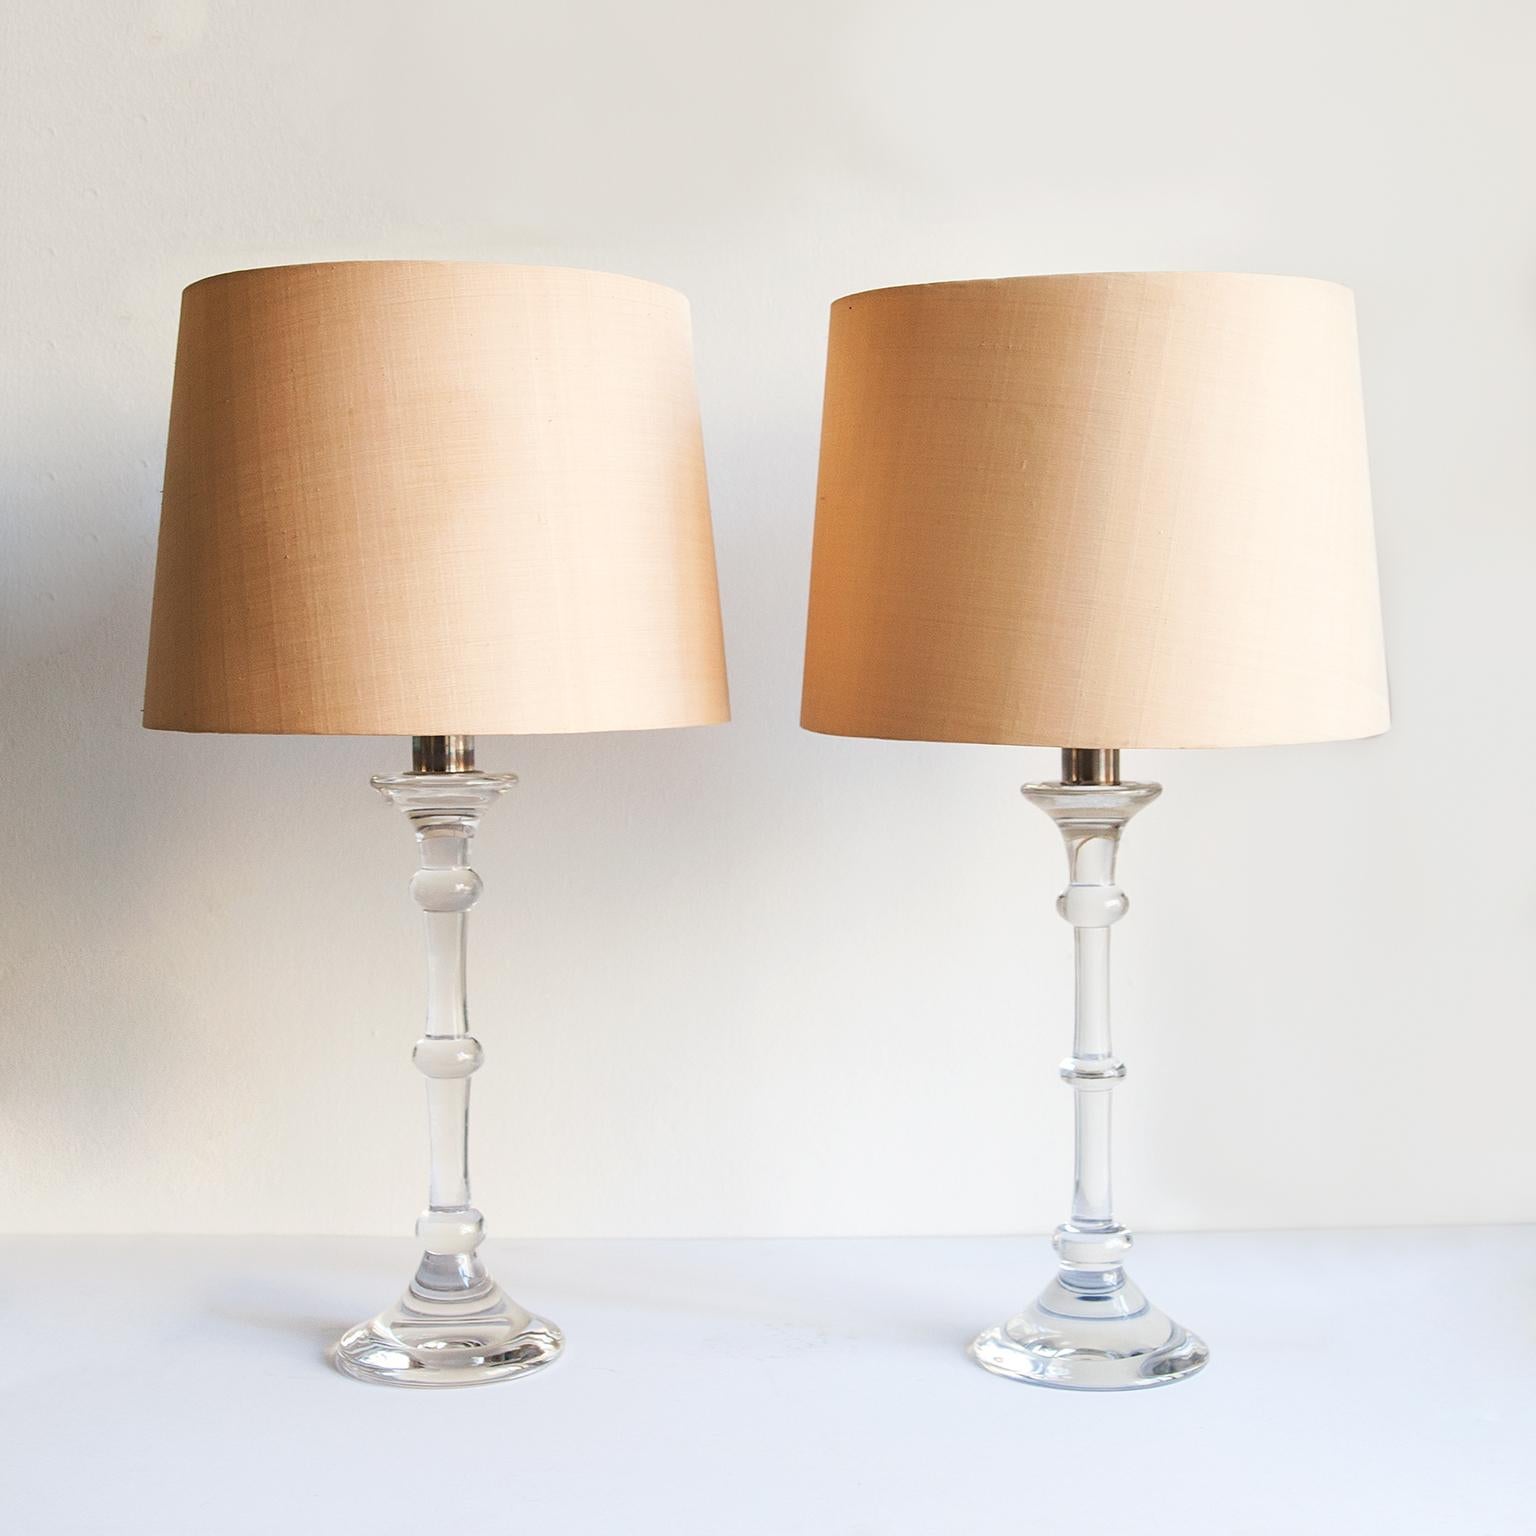 Rare pair Ingo Maurer table lamps made by Val Saint Lambert, 1969.
Solid crystal glass and cream wild silk paper shade.